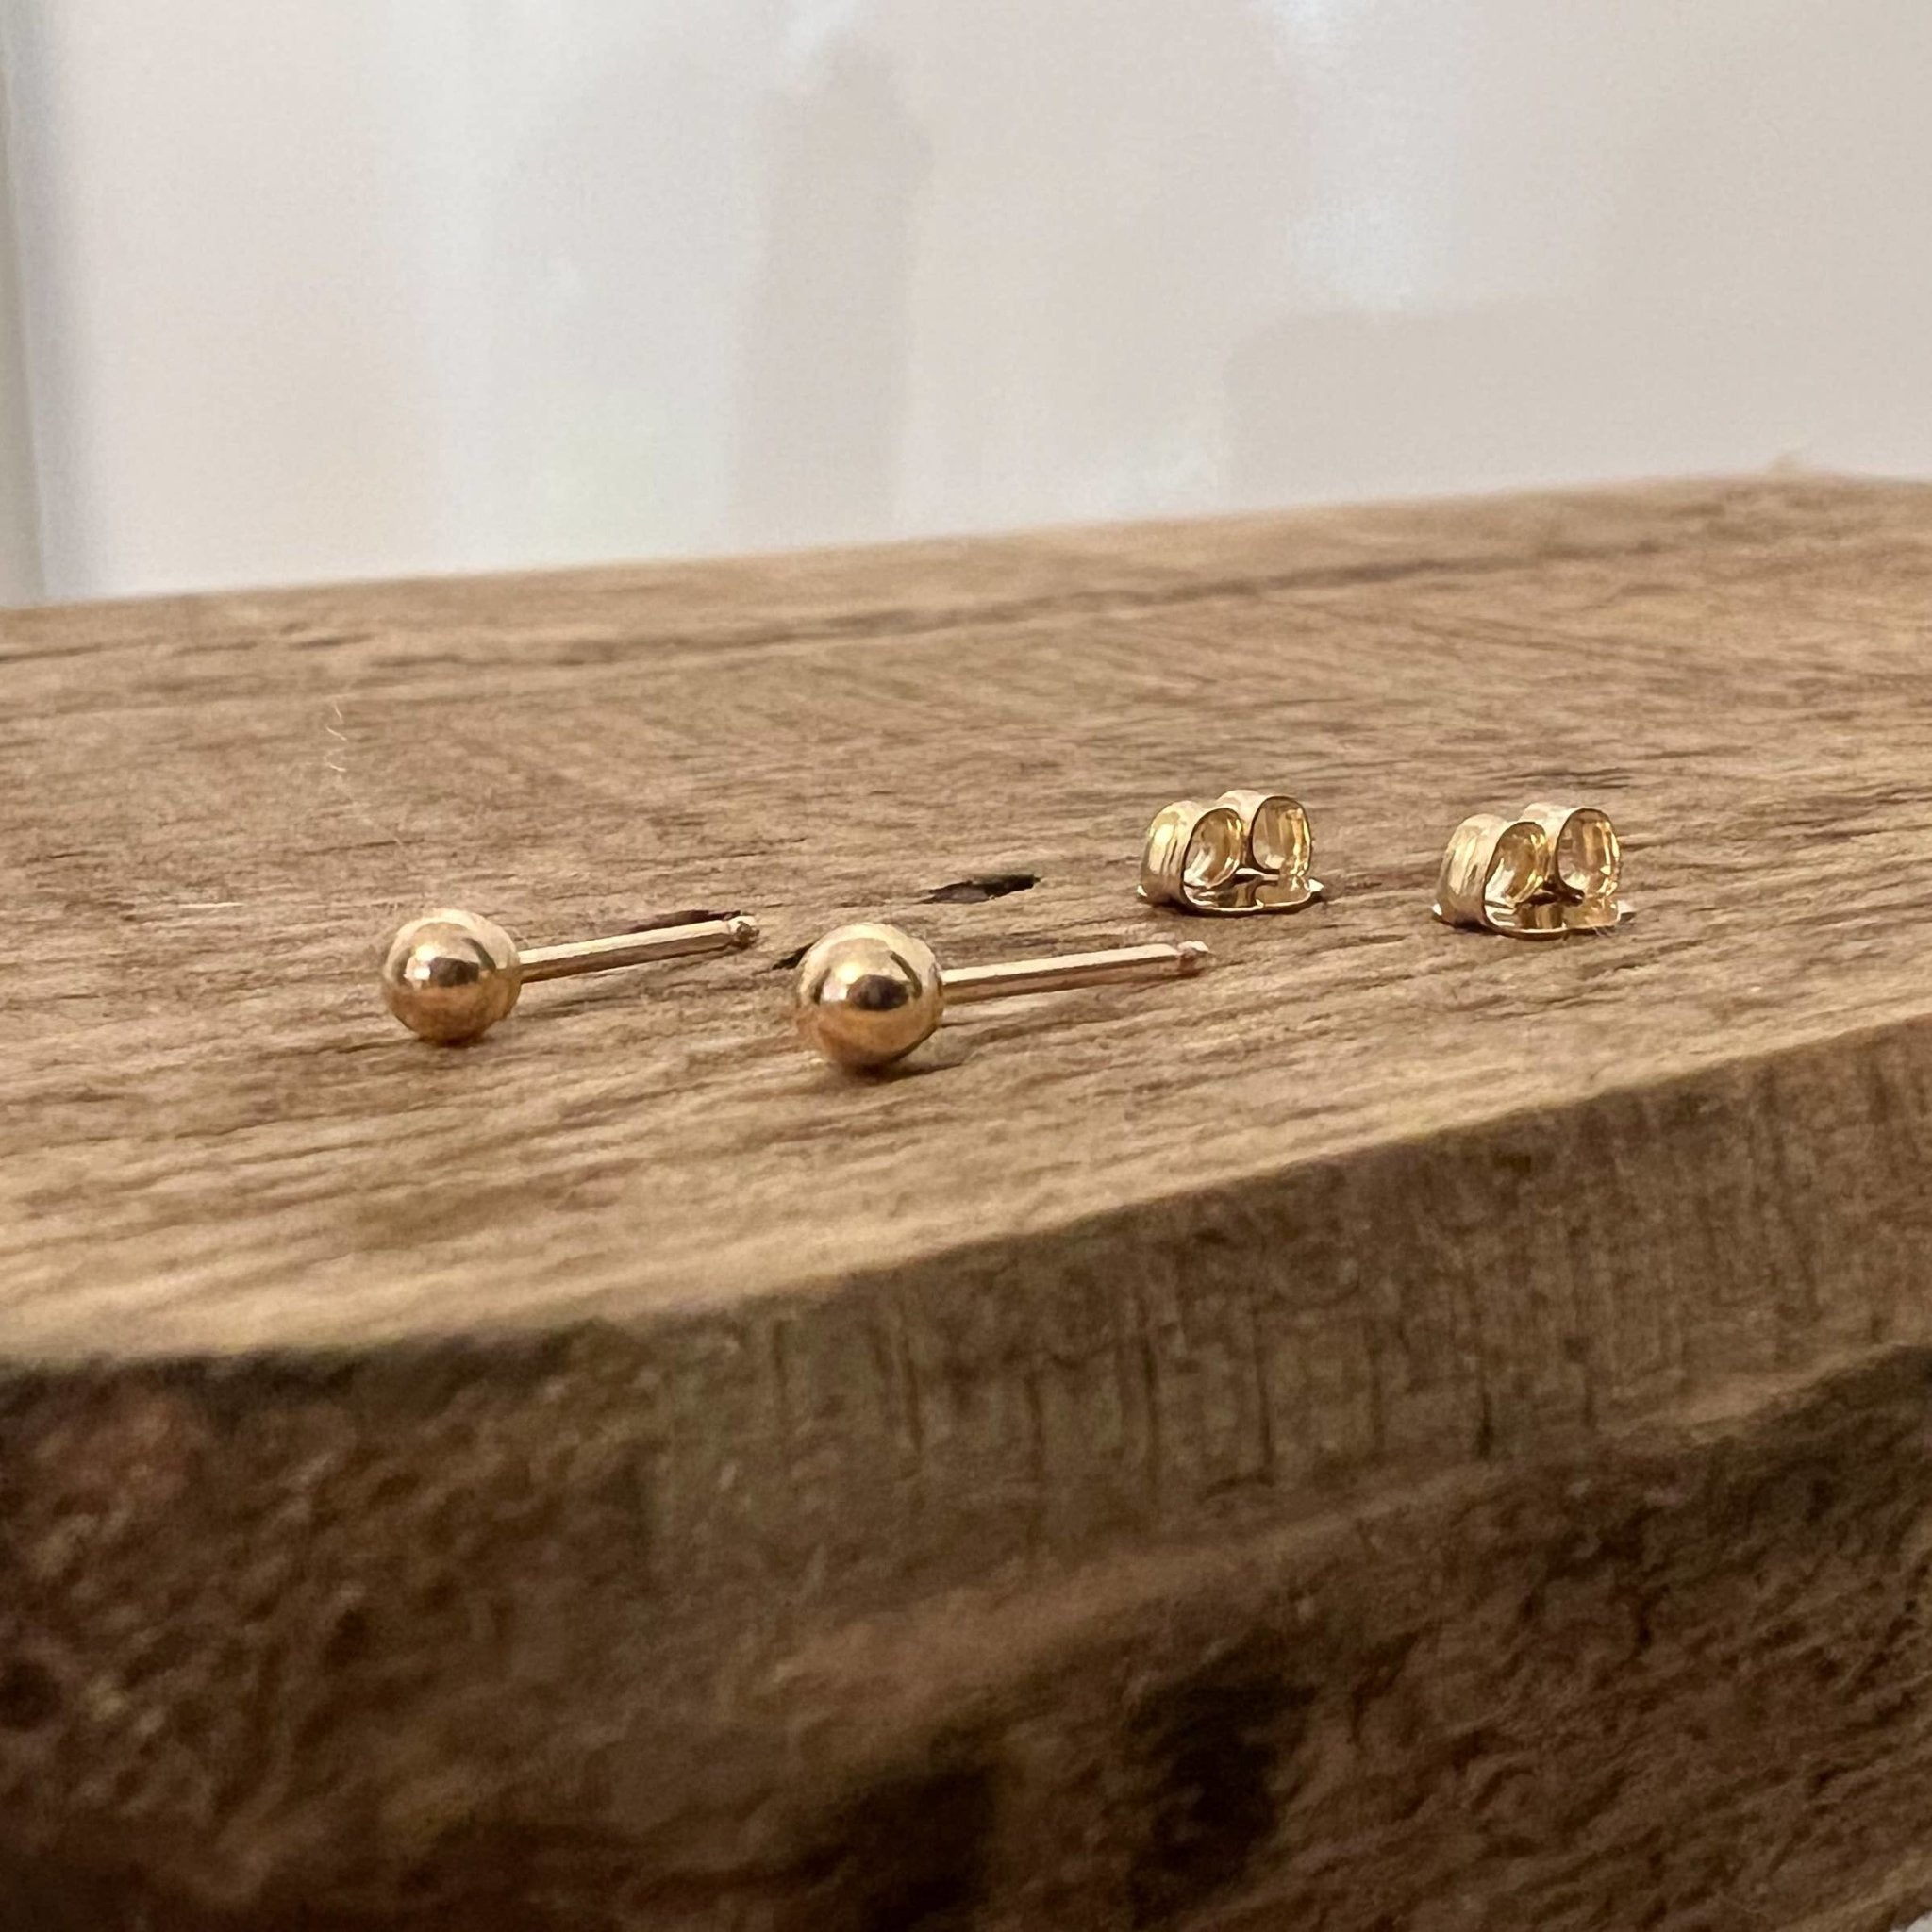 Little Ball Studs (3mm) - Gold Filled or Sterling Silver - Sela+Sage - Stud/Post Earrings